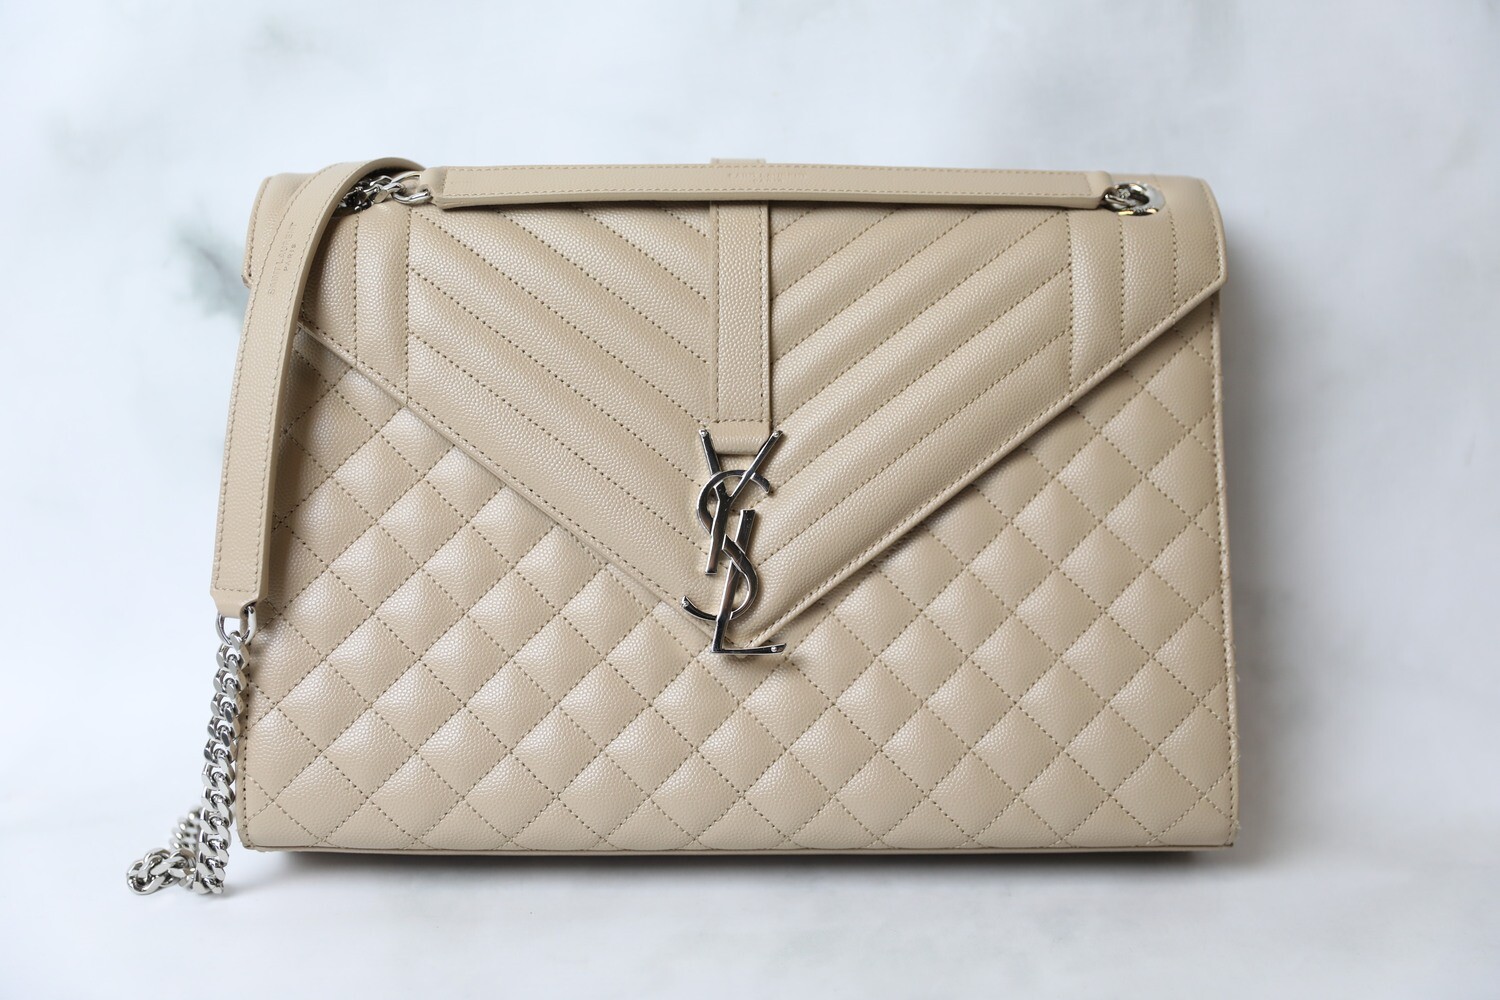 Saint Laurent Large Envelope, Beige Pebbled Leather with Silver Hardware, Preowned in Box WA001